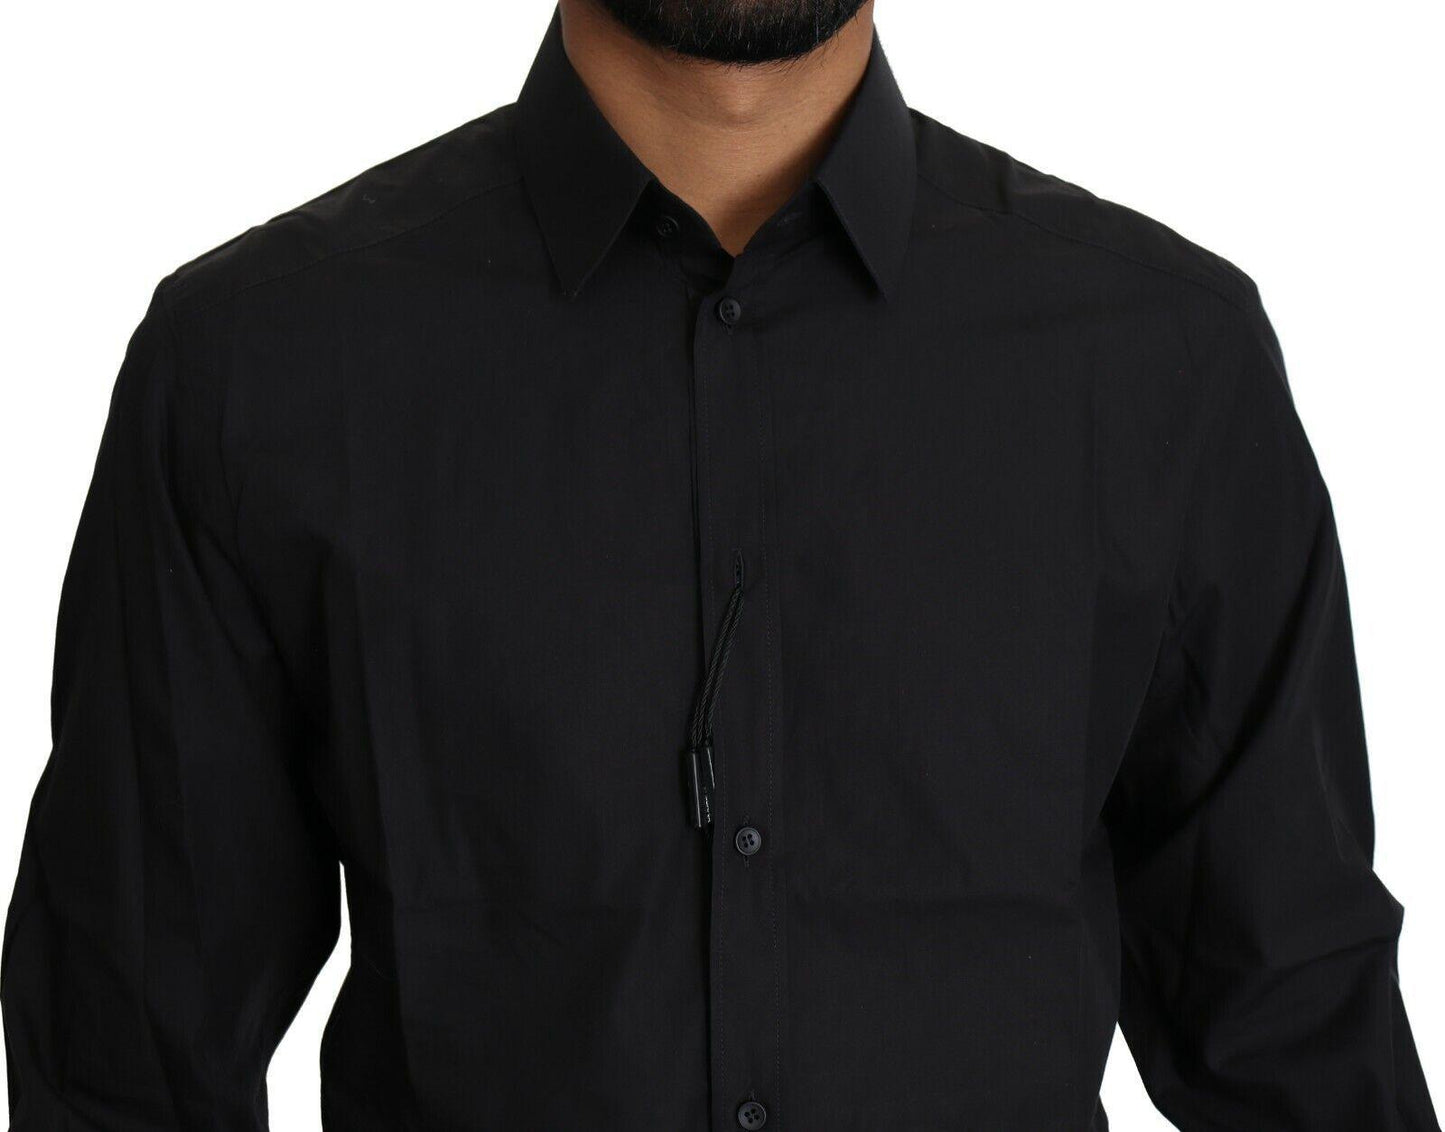 Black Cotton Formal Dress Men Top Shirt - Designed by Dolce & Gabbana Available to Buy at a Discounted Price on Moon Behind The Hill Online Designer Discount Store